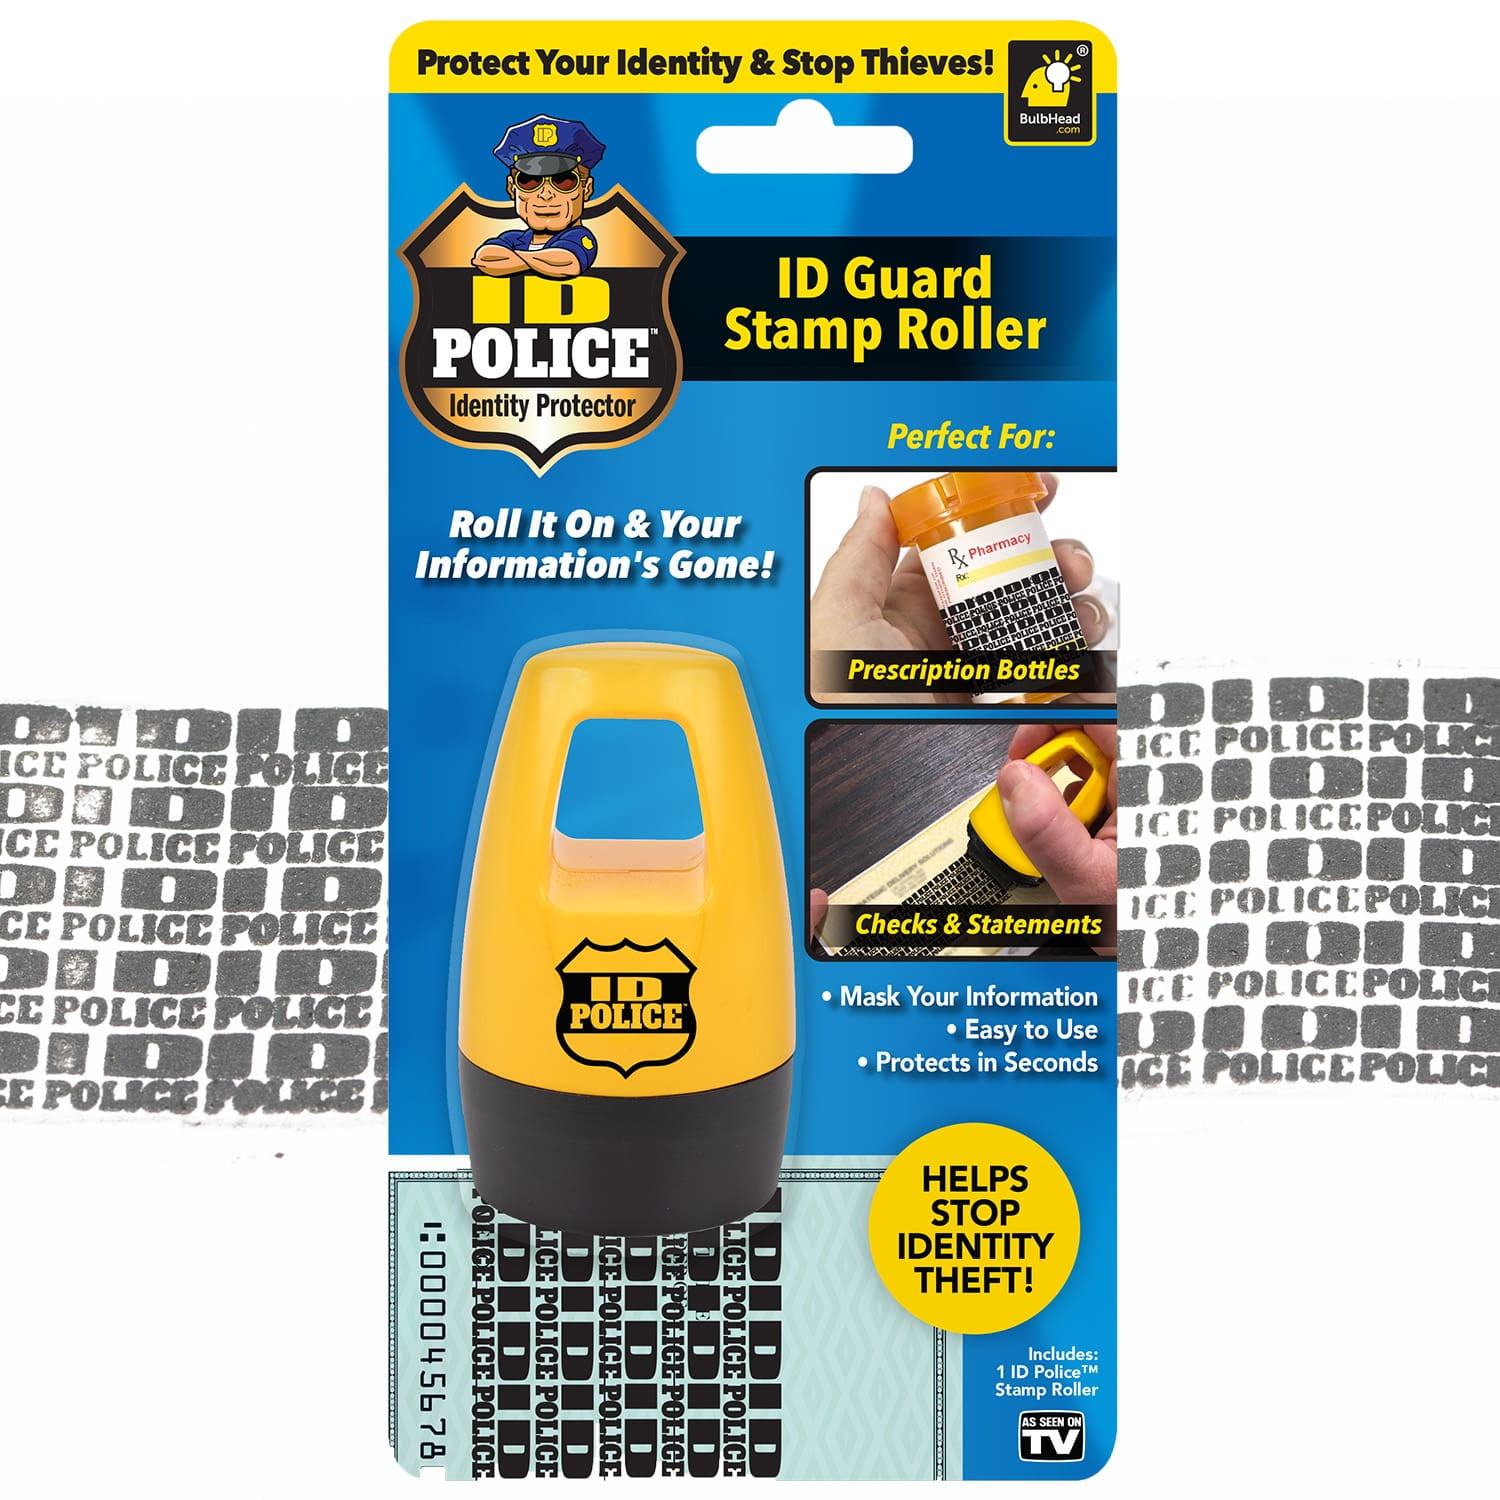 ID Protection Roller Stamps Theft Protection Protect Your Personal Identity